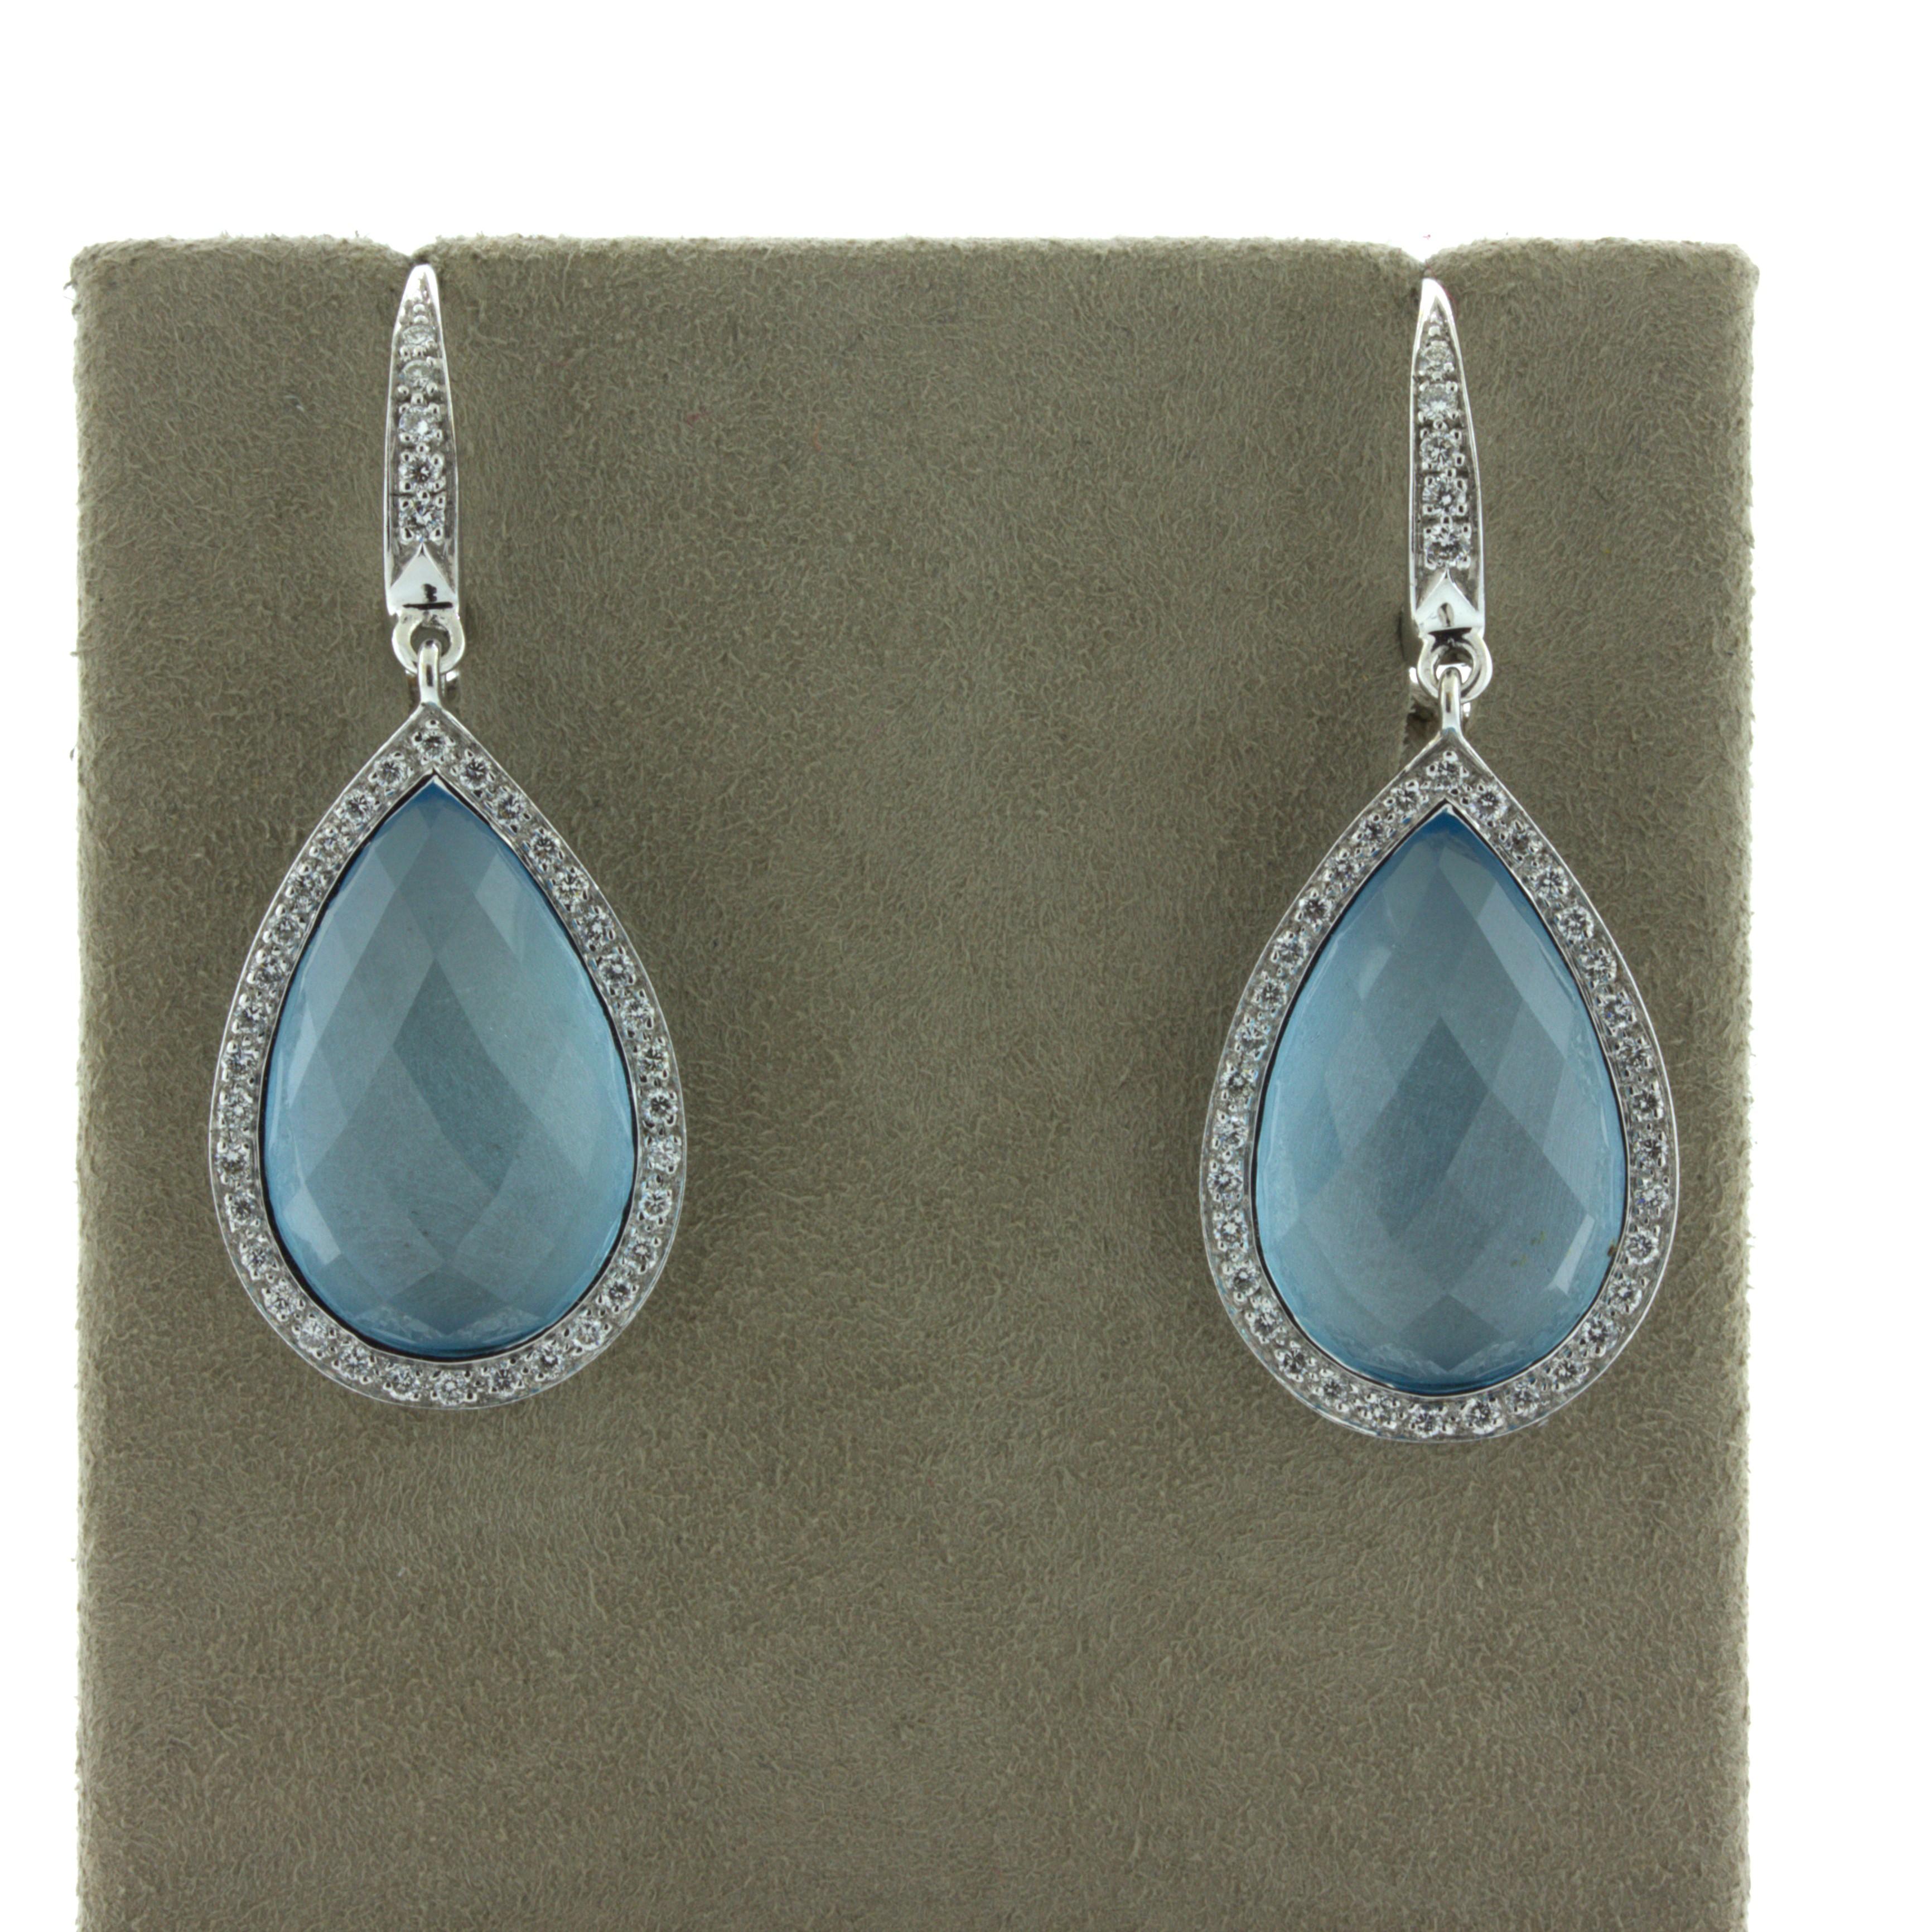 An elegant and classy pair of earrings featuring pear-shaped rose-cut blue topaz! The topaz weigh a total of 22.94 carats and have a lovely pear-shape with a rose-cut cabochon finish giving the stones added uniqueness. They are haloed by round